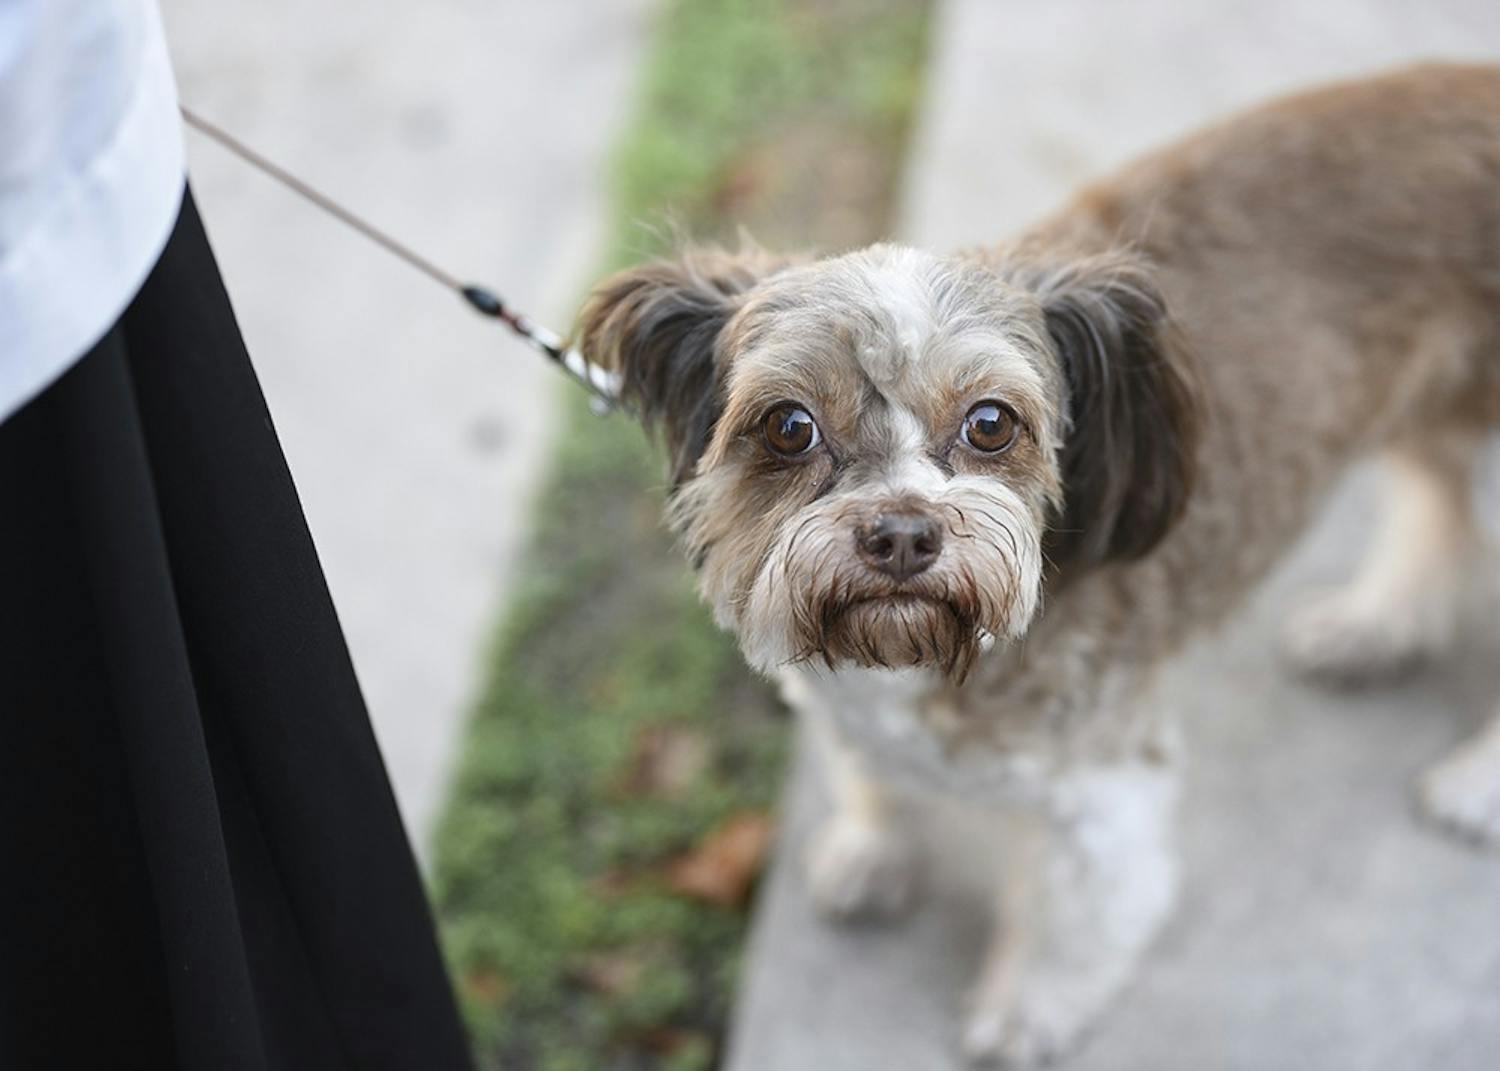 GALLERY: Dogs and cats are blessed at the Trinity Episcopal Church